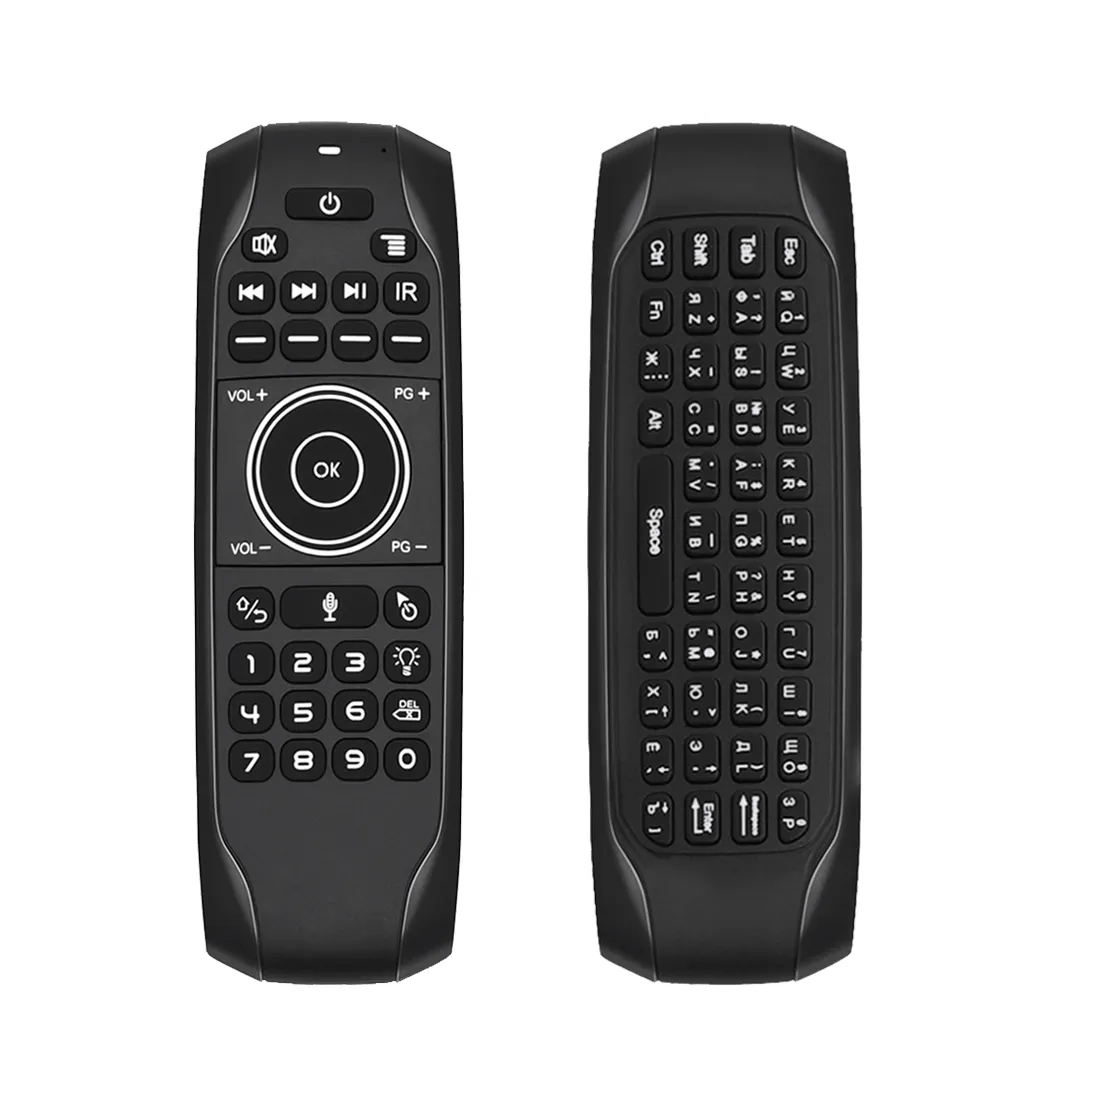 New TV remote control 2.4GHz Wireless Remote Control Air Mouse IR Learning Backlit Voice air mouse with mini keyboard G7R Pro